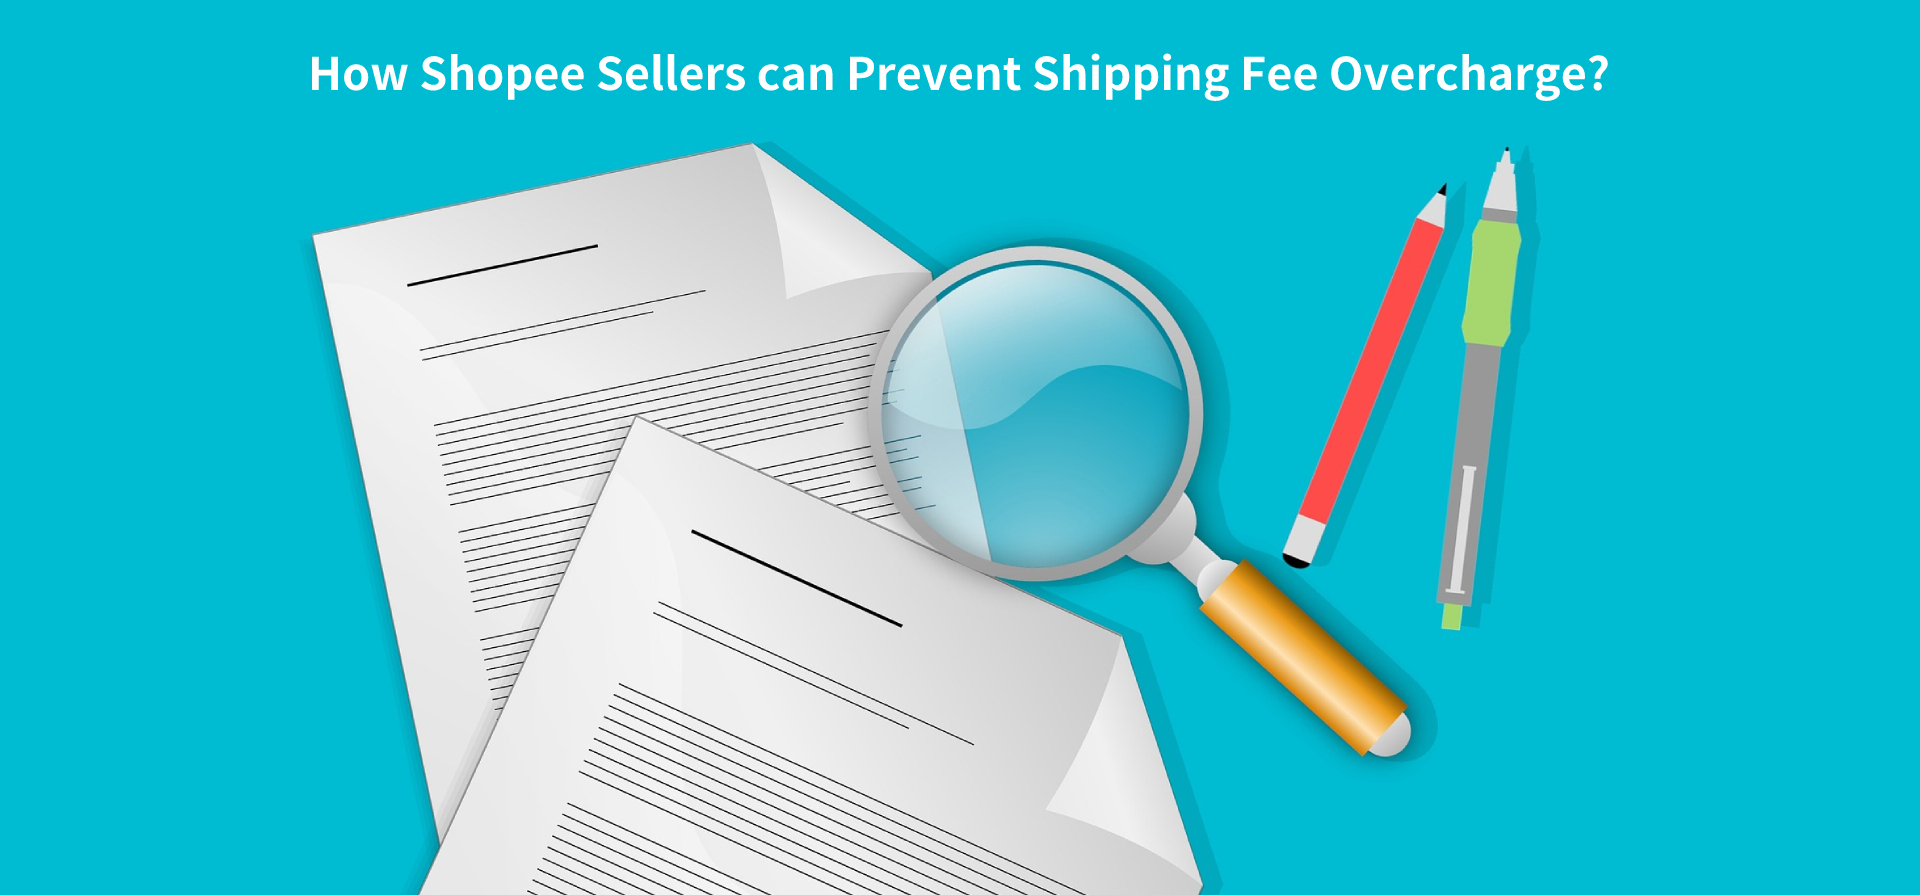 How Shopee Sellers can Prevent Shipping Fee Overcharge?